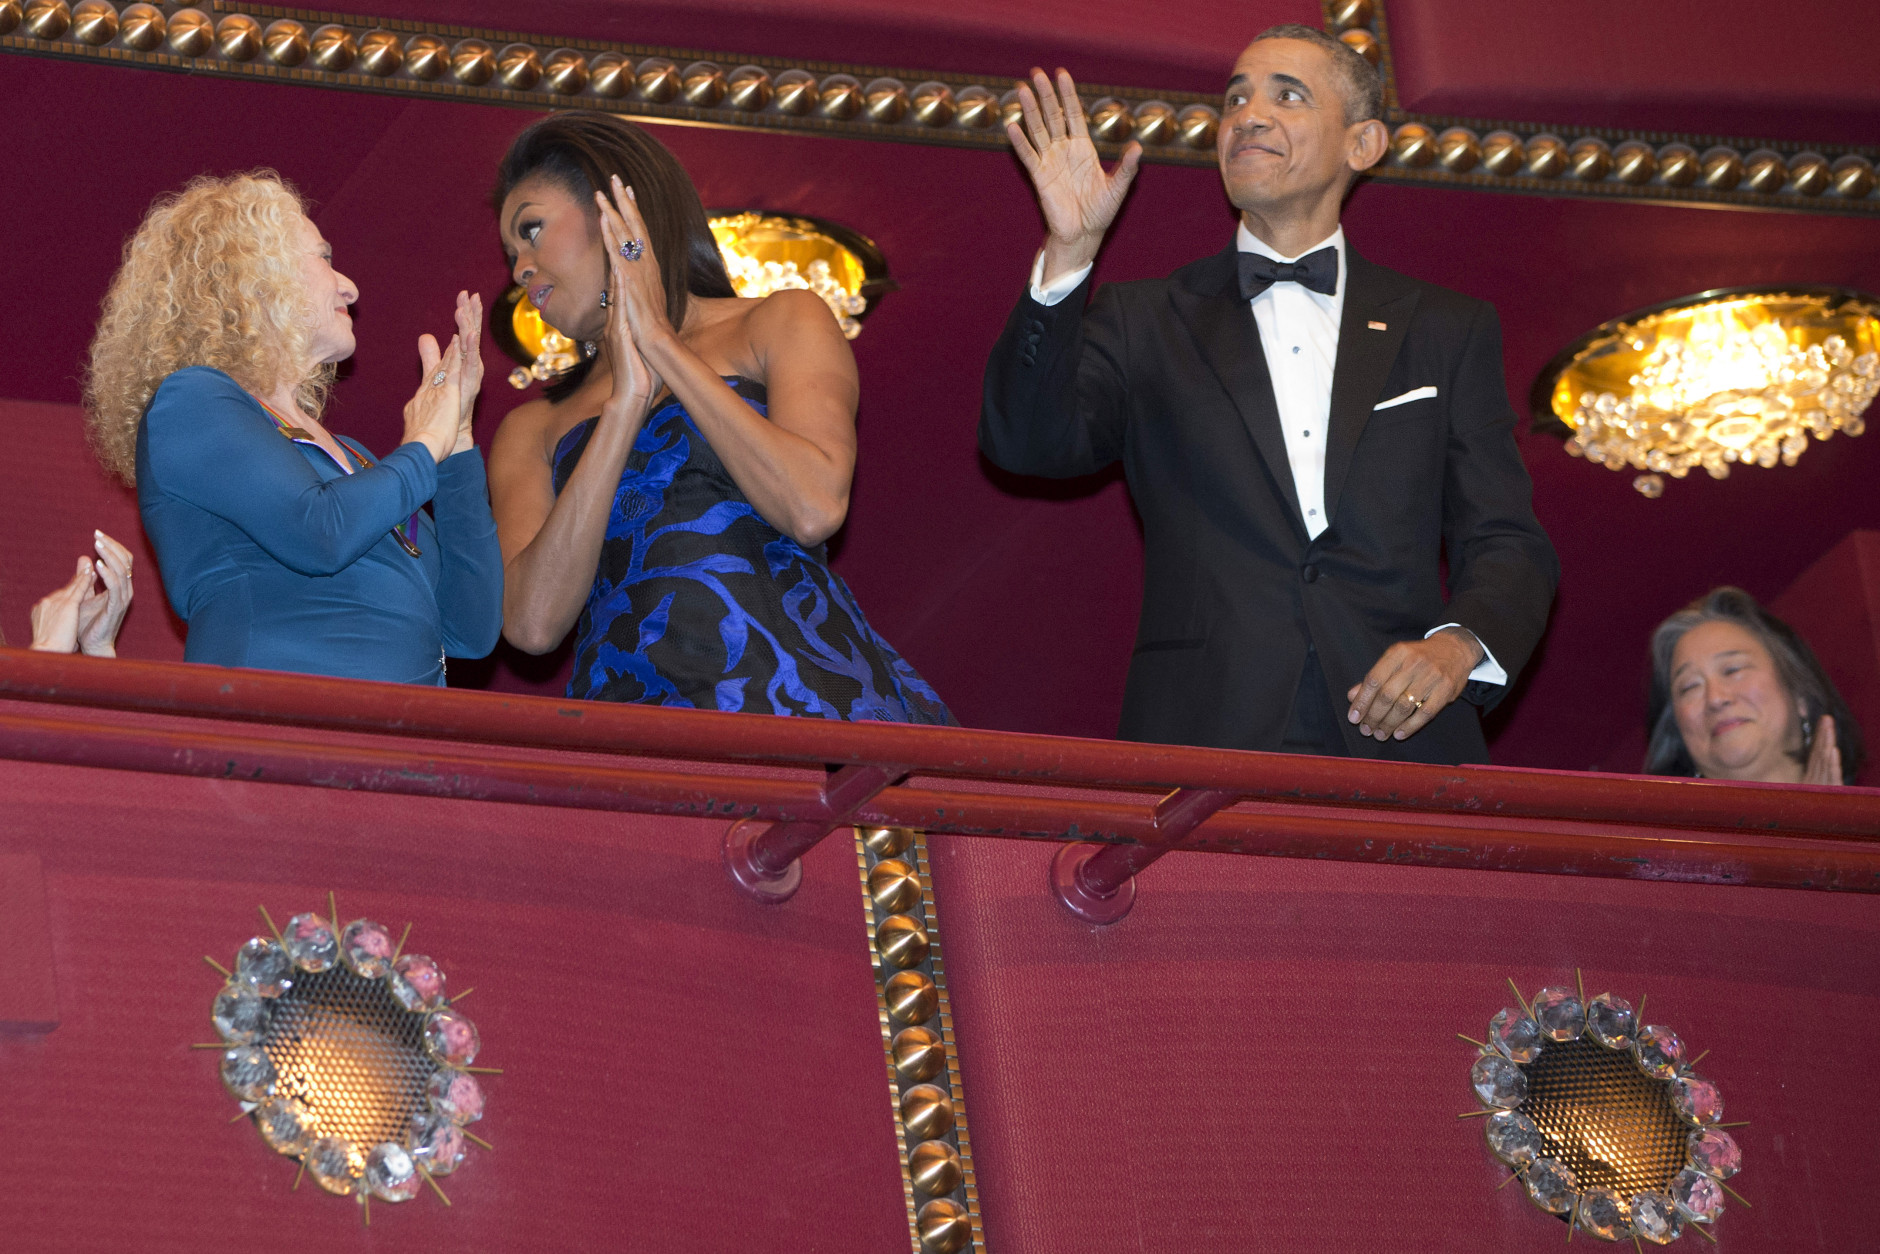 President Barack Obama waves as first lady Michelle Obama speaks to honoree singer-songwriter Carole King, left, as the Obama's arrive to the 2015 Kennedy Center Honors in Washington, after the president made an address to the nation, Sunday, Dec. 6, 2015. (AP Photo/Jacquelyn Martin)